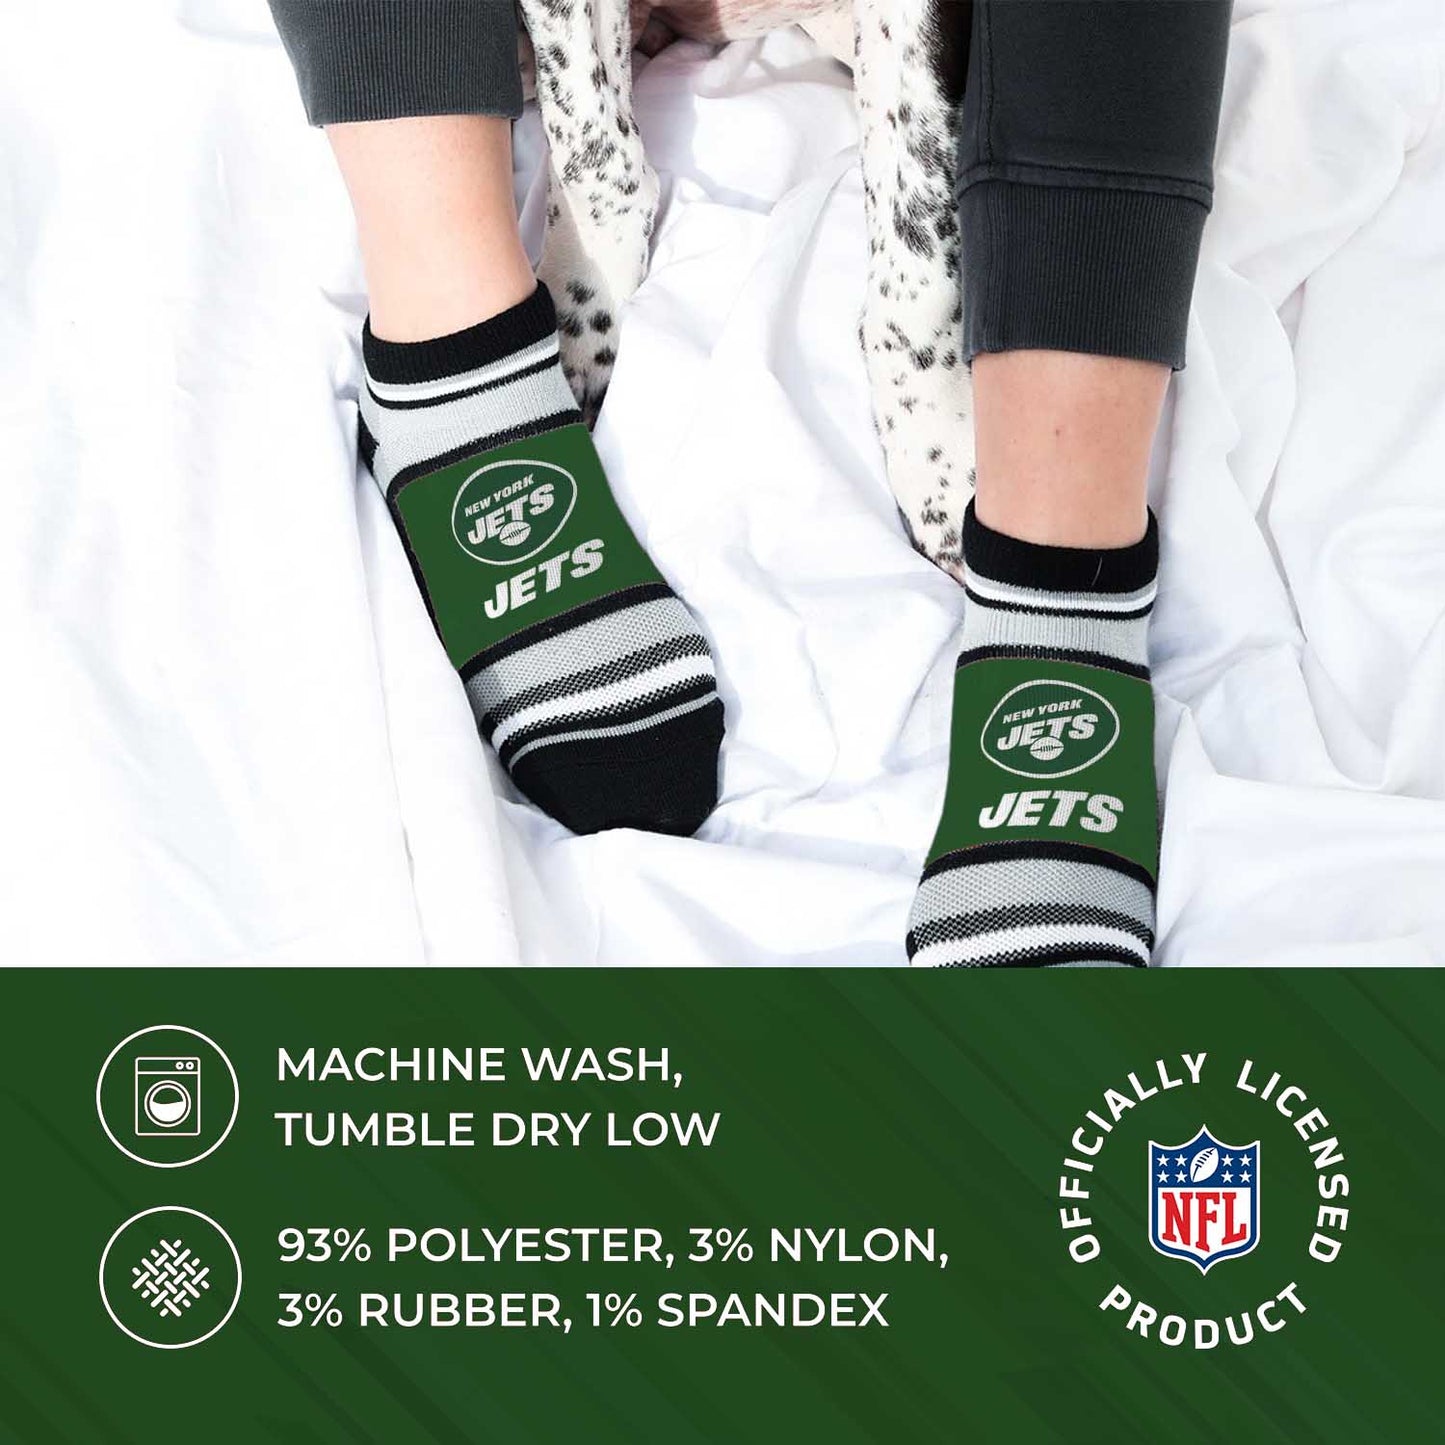 New York Jets NFL Adult Marquis Addition No Show Socks - Green